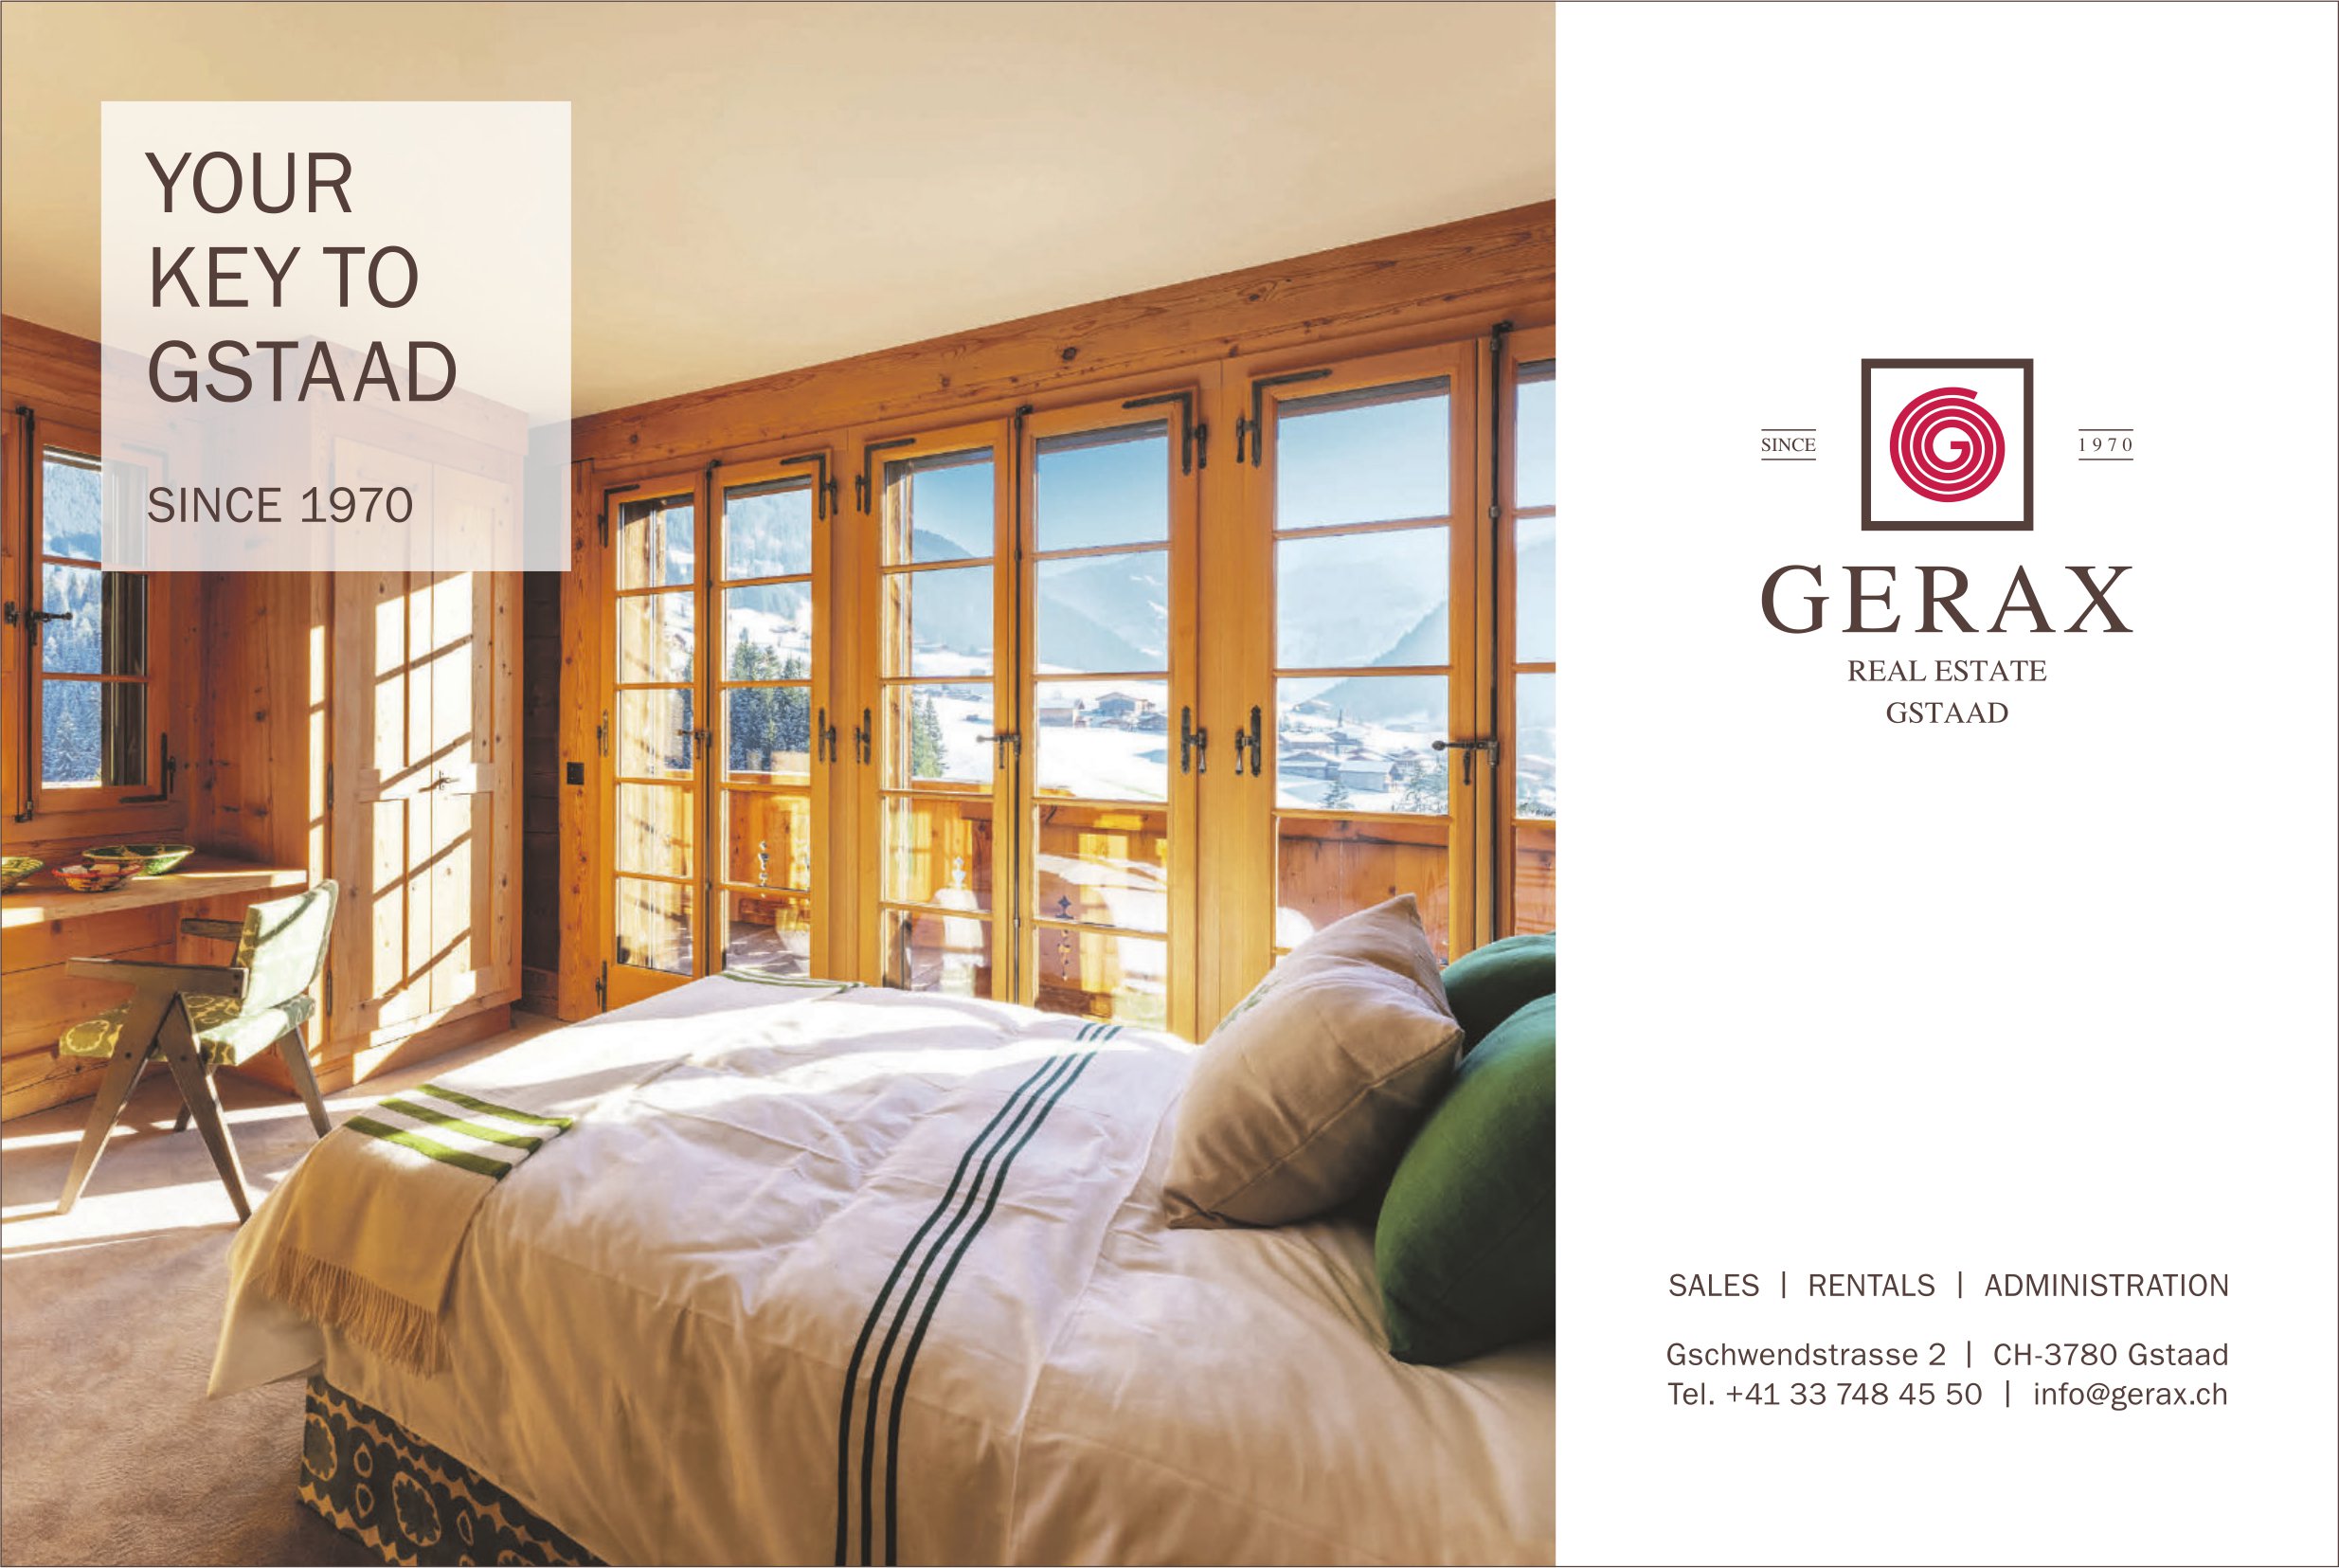 Gerax Real Estate, Gstaad - Your key to Gstaad